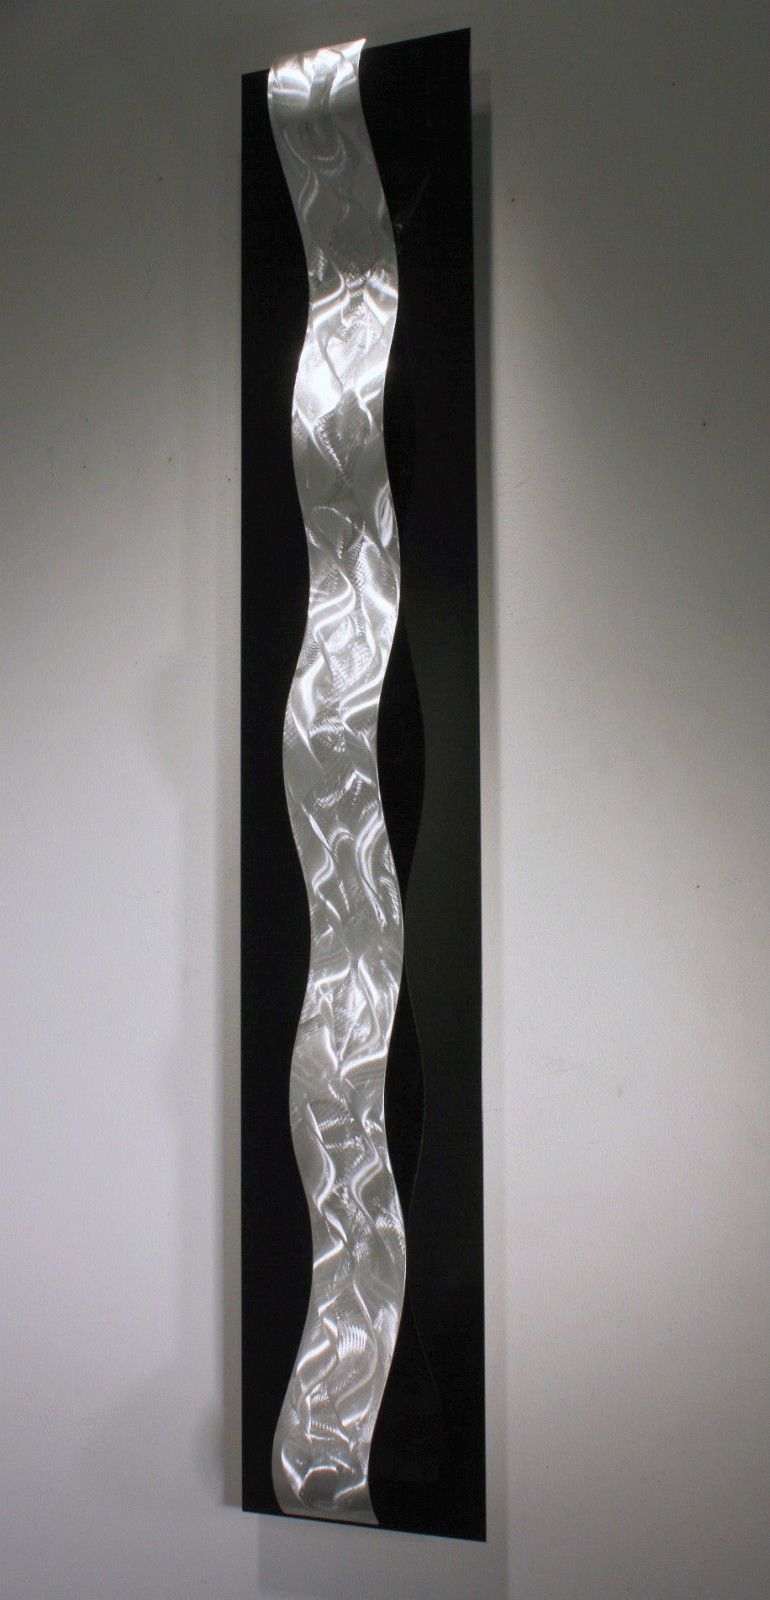 Wilmos Kovacs – Black And Silver Metal Wall Art 3d Home Decor Sculpture Inside Antique Silver Metal Wall Art Sculptures (View 12 of 15)